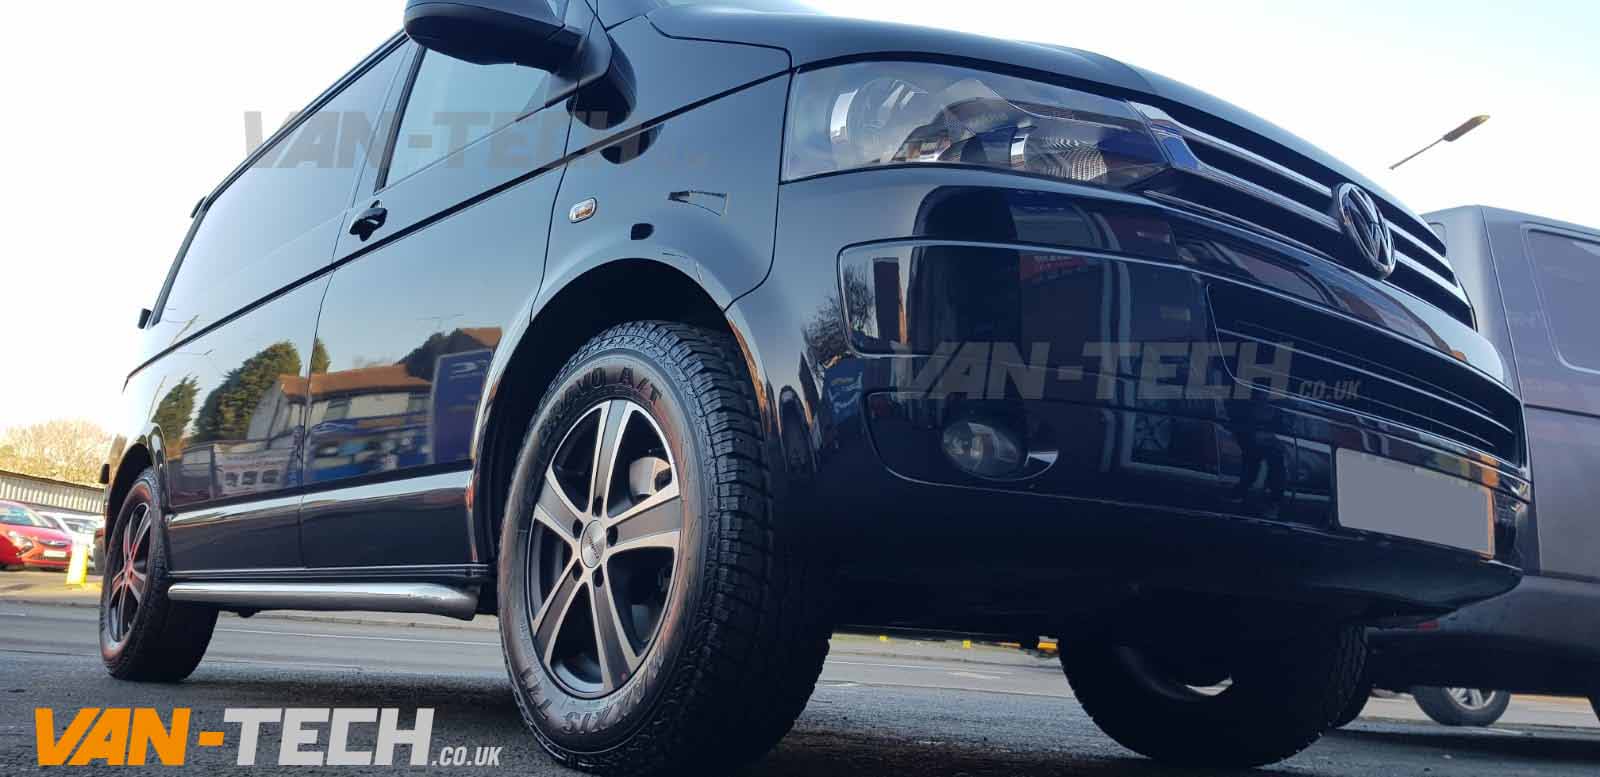 Calibre Highway 17" Alloy Wheels and Maxxis Bravo Series AT-771 All Terrain Tyres